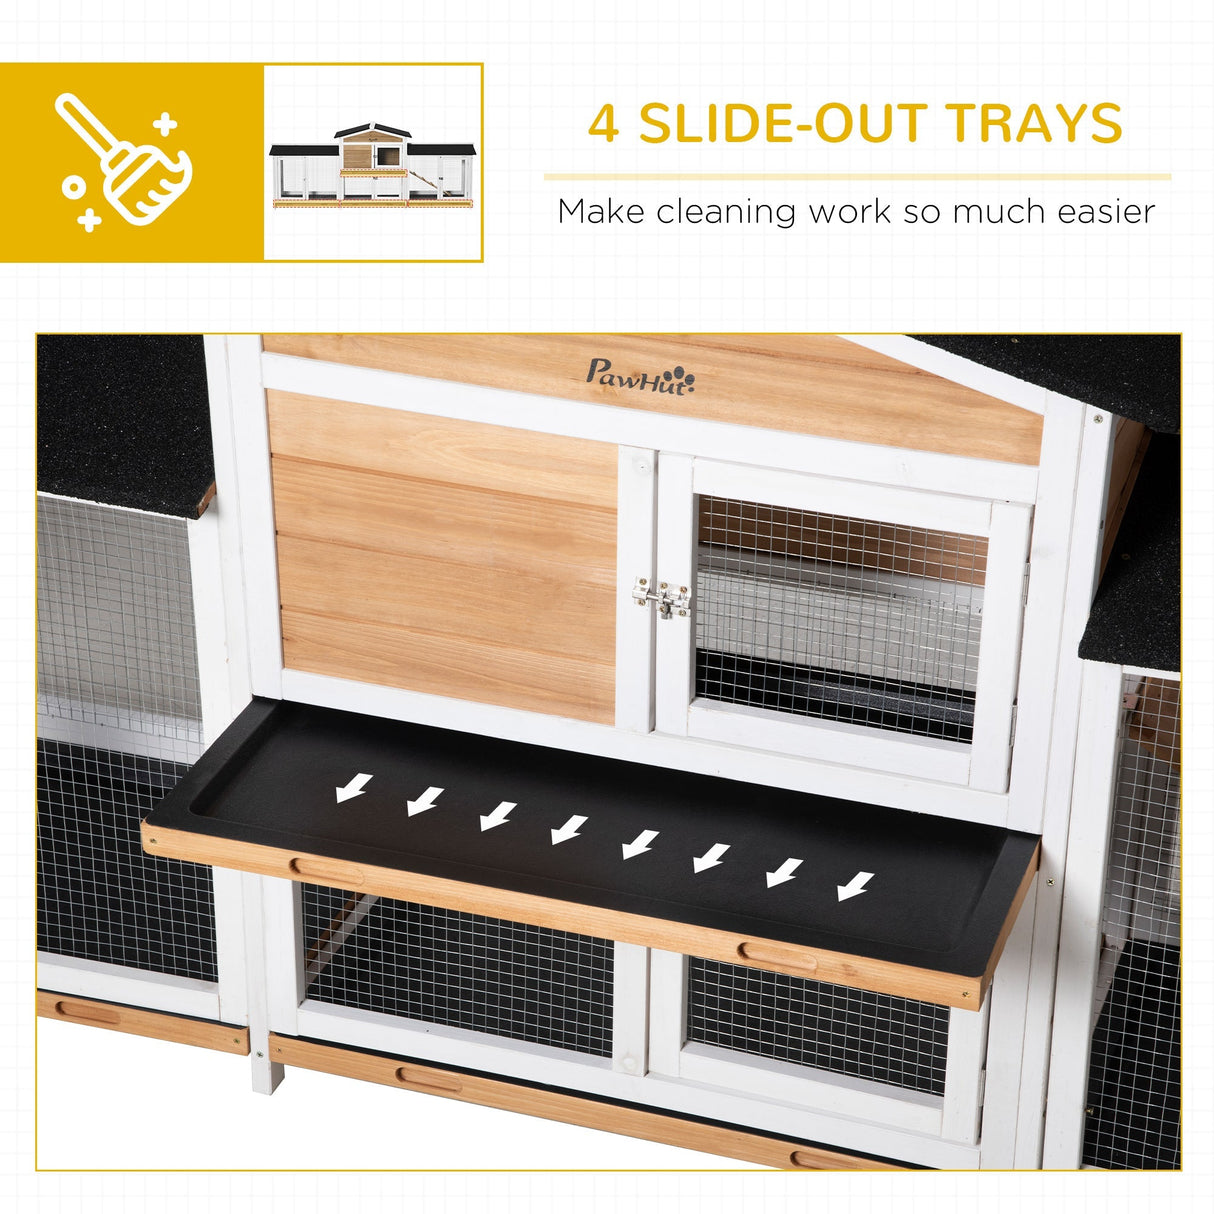 Rabbit Hutch Outdoor, 2-Tier Guinea Pig Hutch, Wooden Bunny Run, Small Animal House with Double Side Run Boxes, Slide-out Tray, Ramp, 230 x 53 x 93.5cm, PawHut,